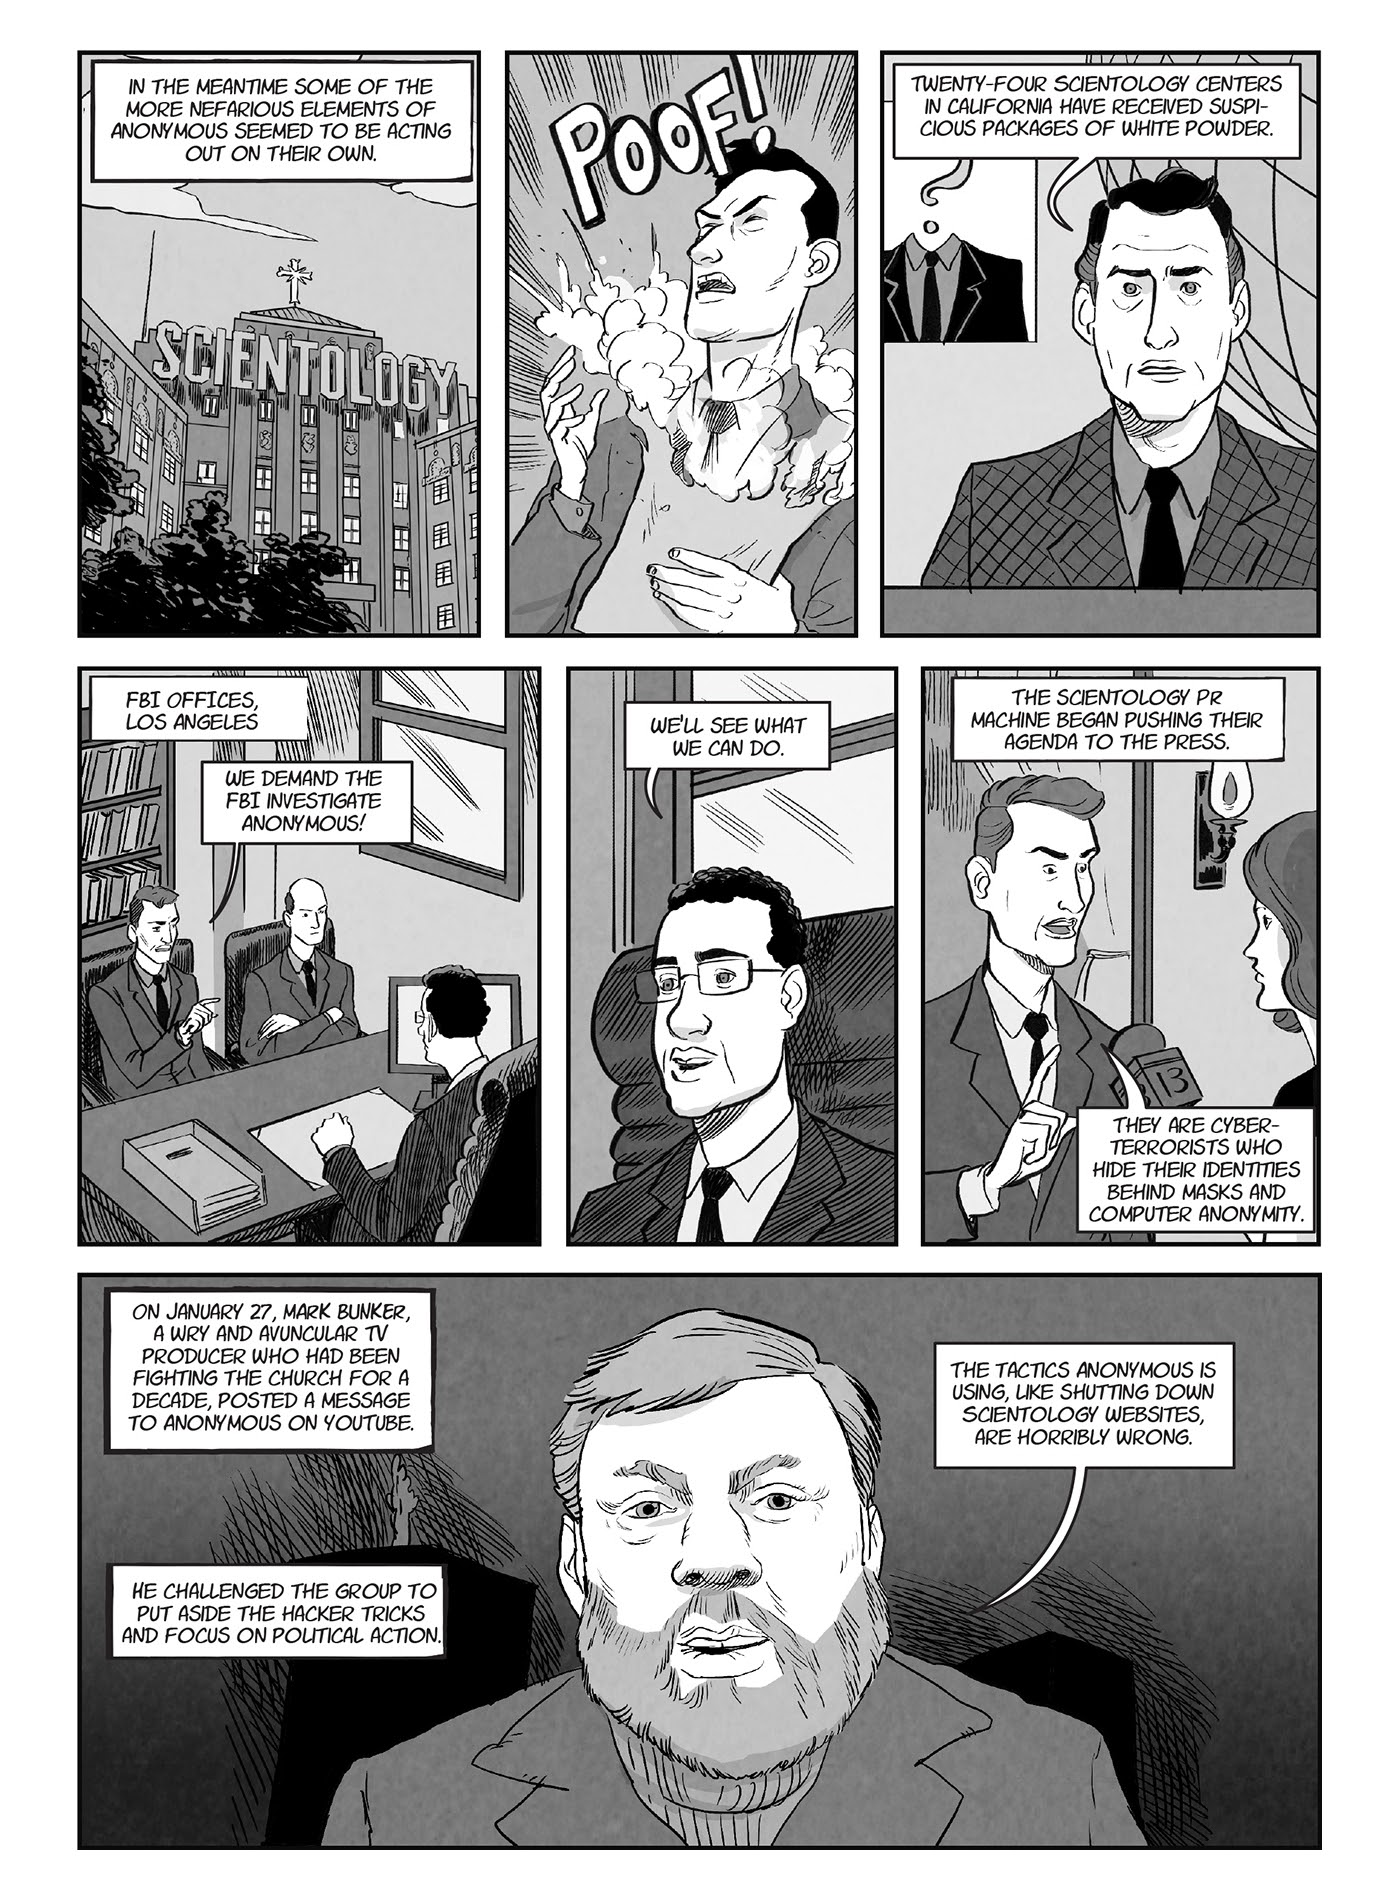 Read online A for Anonymous: How a Mysterious Hacker Collective Transformed the World comic -  Issue # TPB - 37